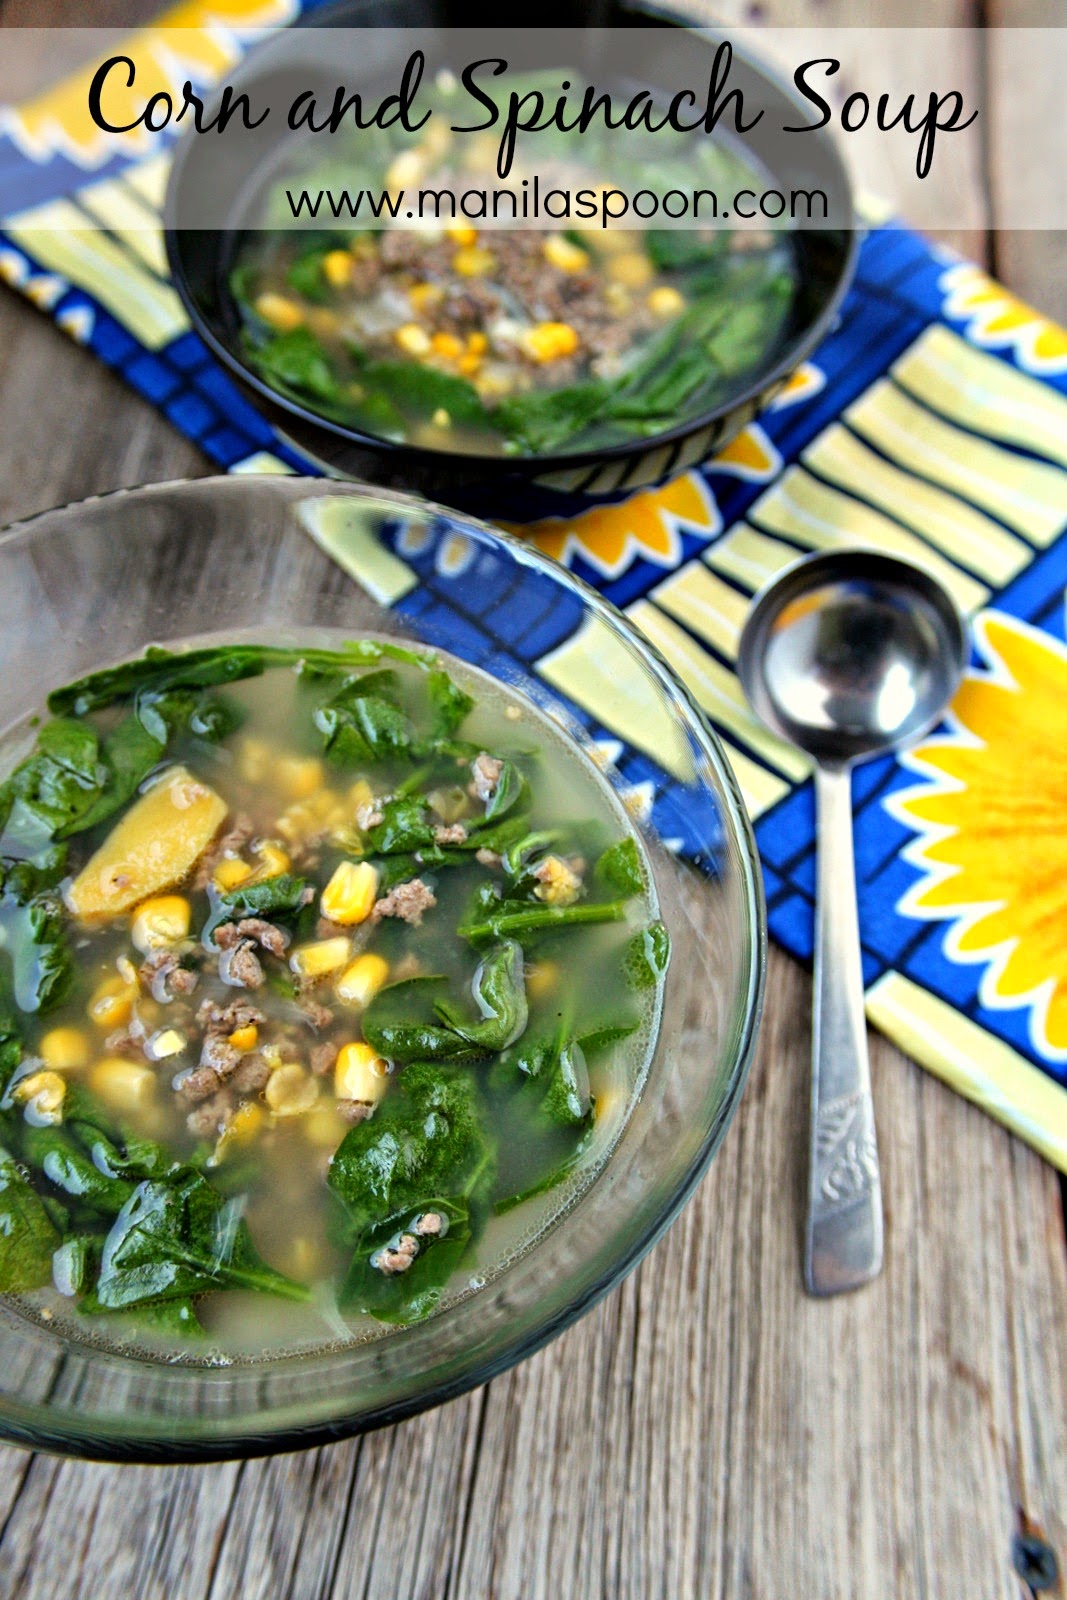 With corn, spinach and meat and flavored with ginger for extra zing, this simple soup is tasty, healthy and easy to make.